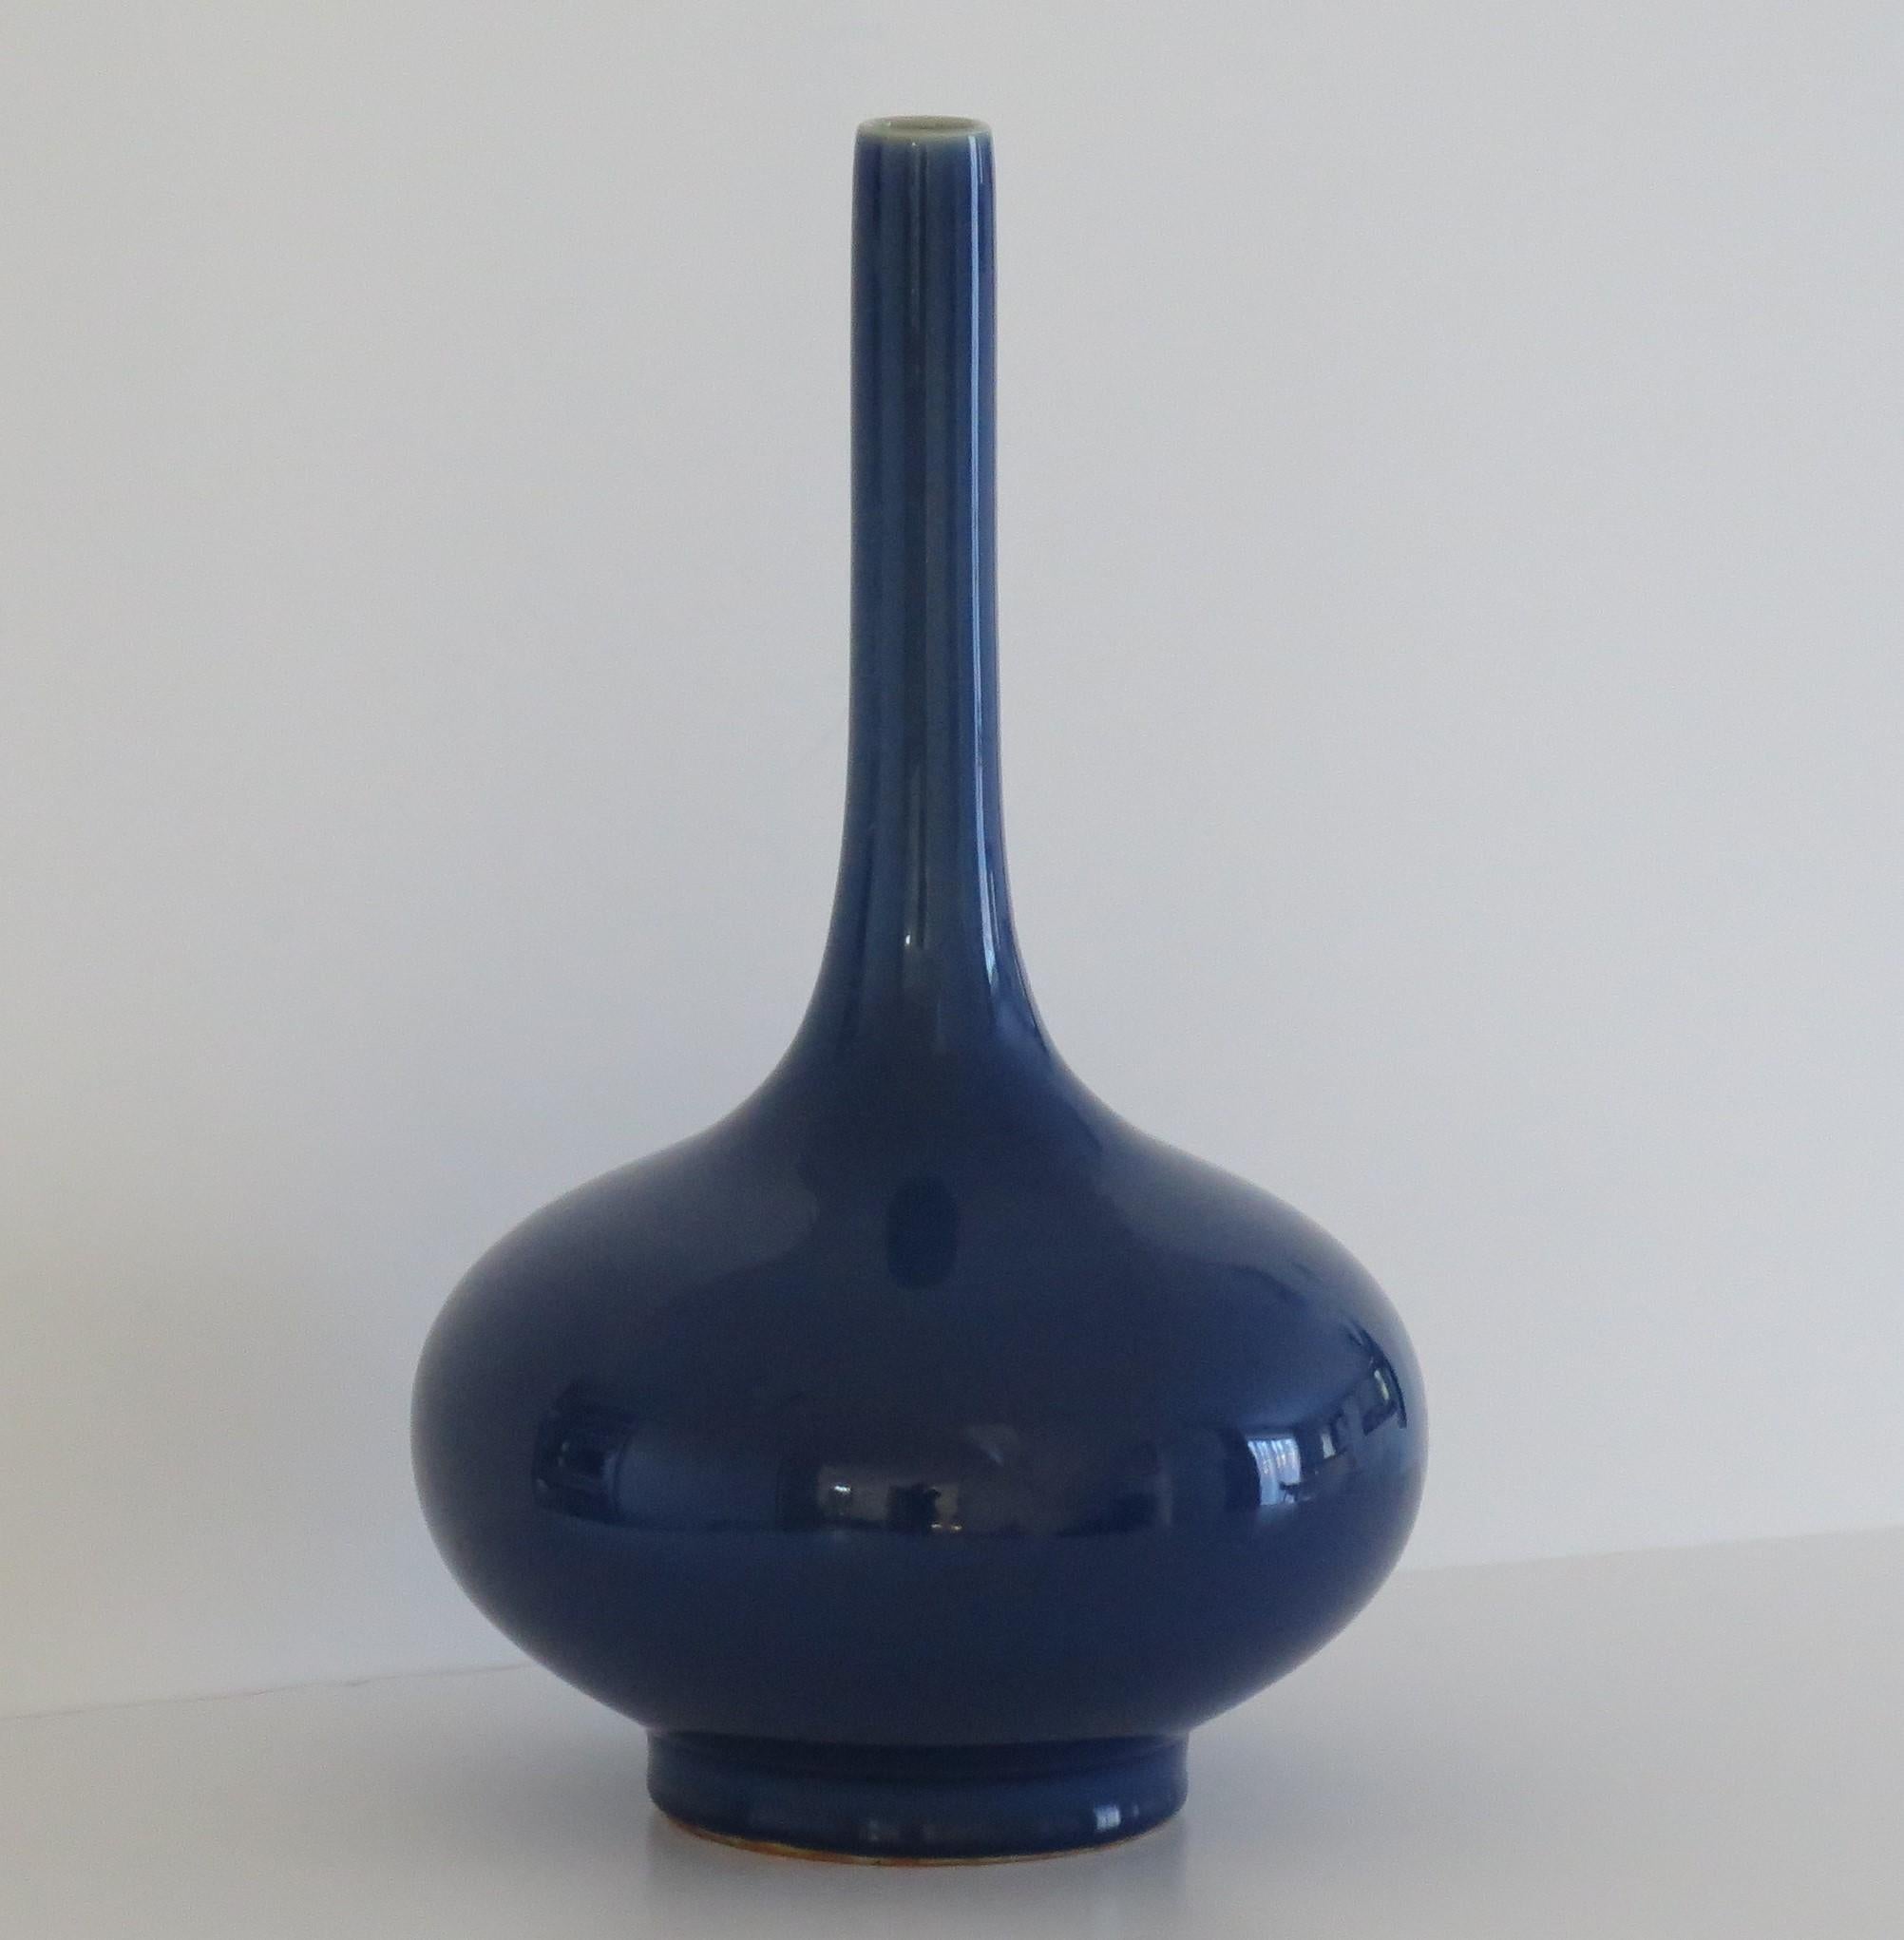 This is a very beautiful, highly decorative Tall Chinese bottle vase with a monochrome or single glaze colour of a fine sapphire-blue,  which we date to the late 19th century,  Qing period .

This Chinese Export vase is well potted on a fairly tall